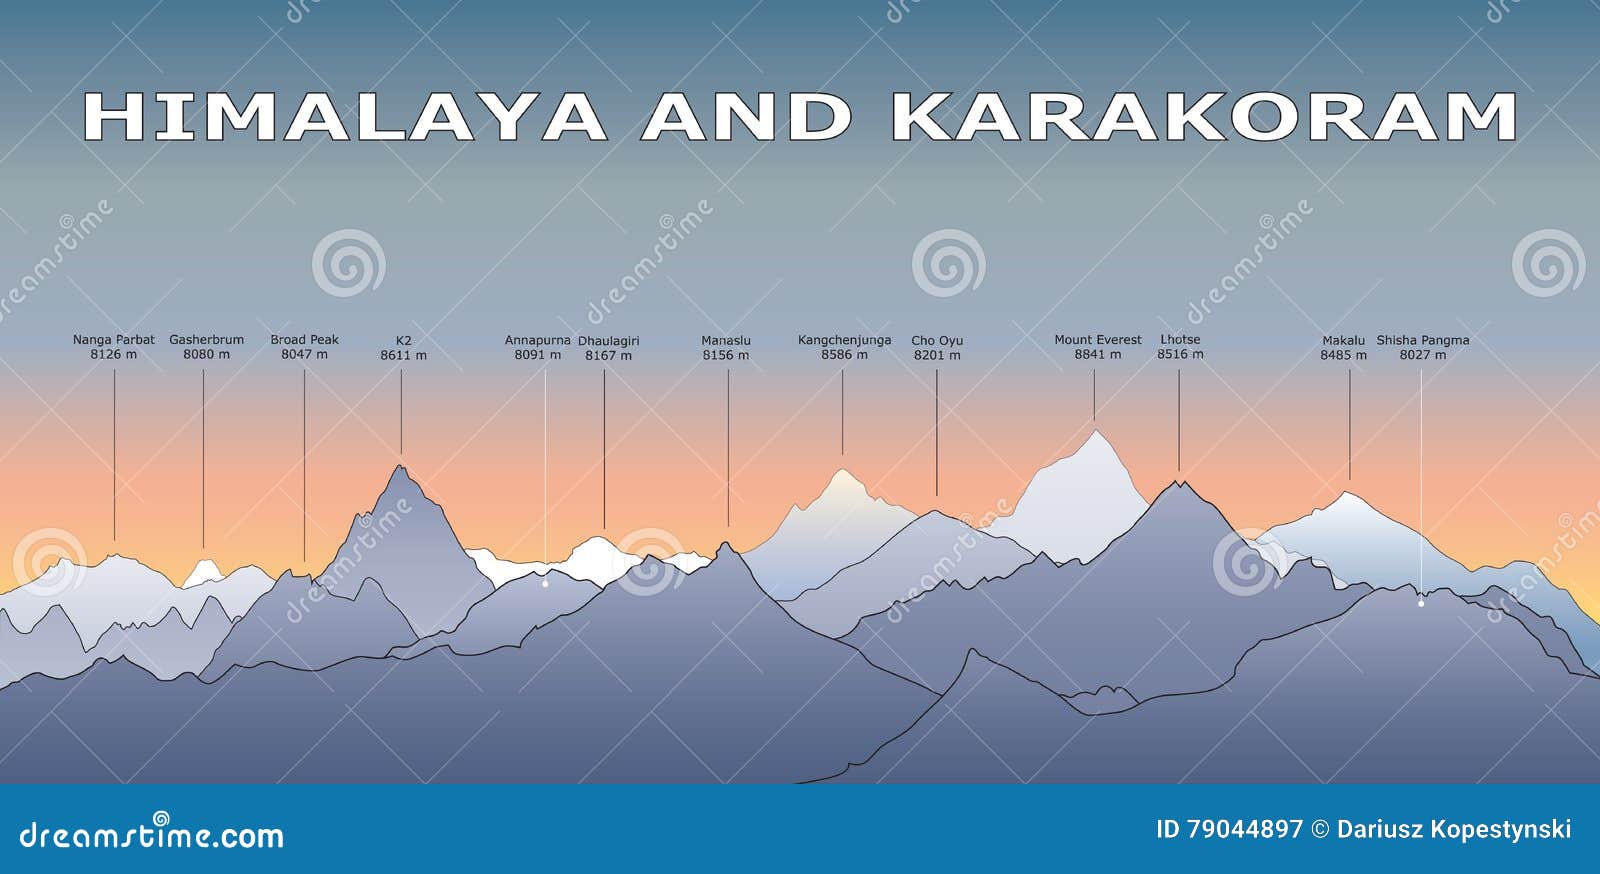 himalaya and karakorum mountains. peaks with right  and i provide name and height of the summits